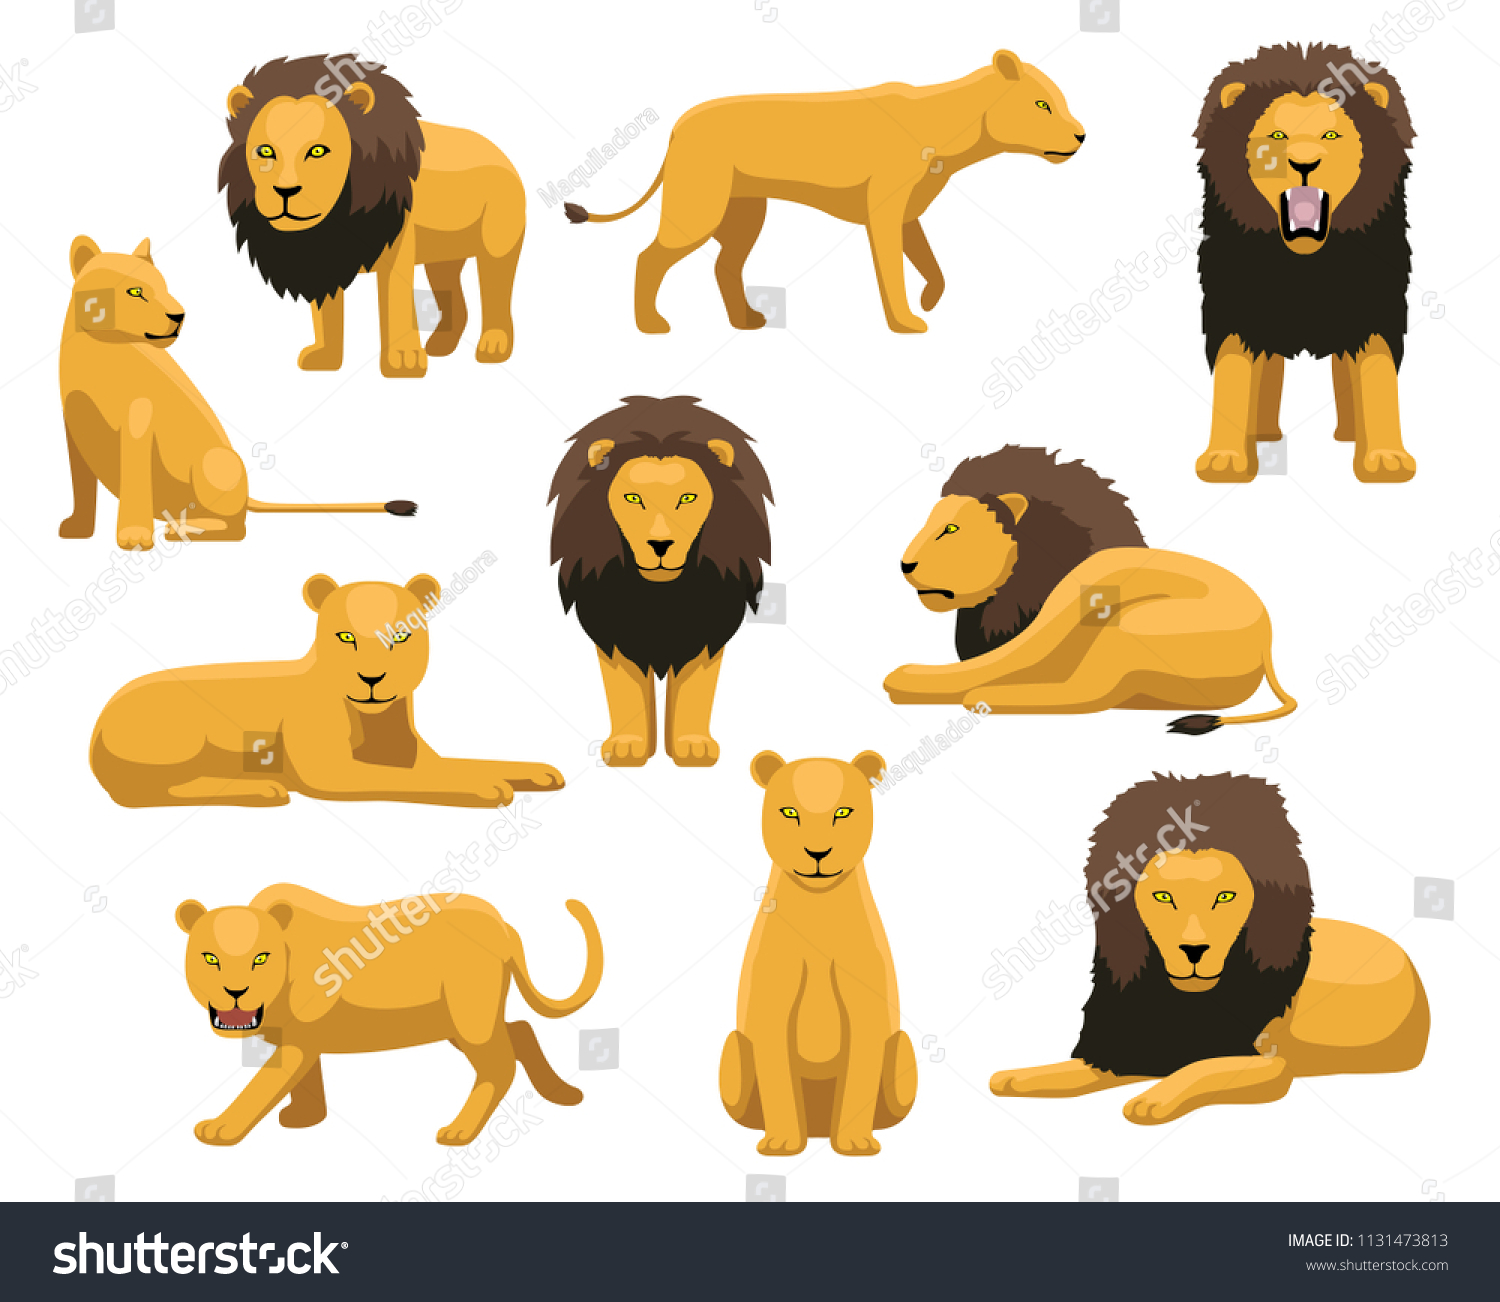 cartoon pics of lion and lioness